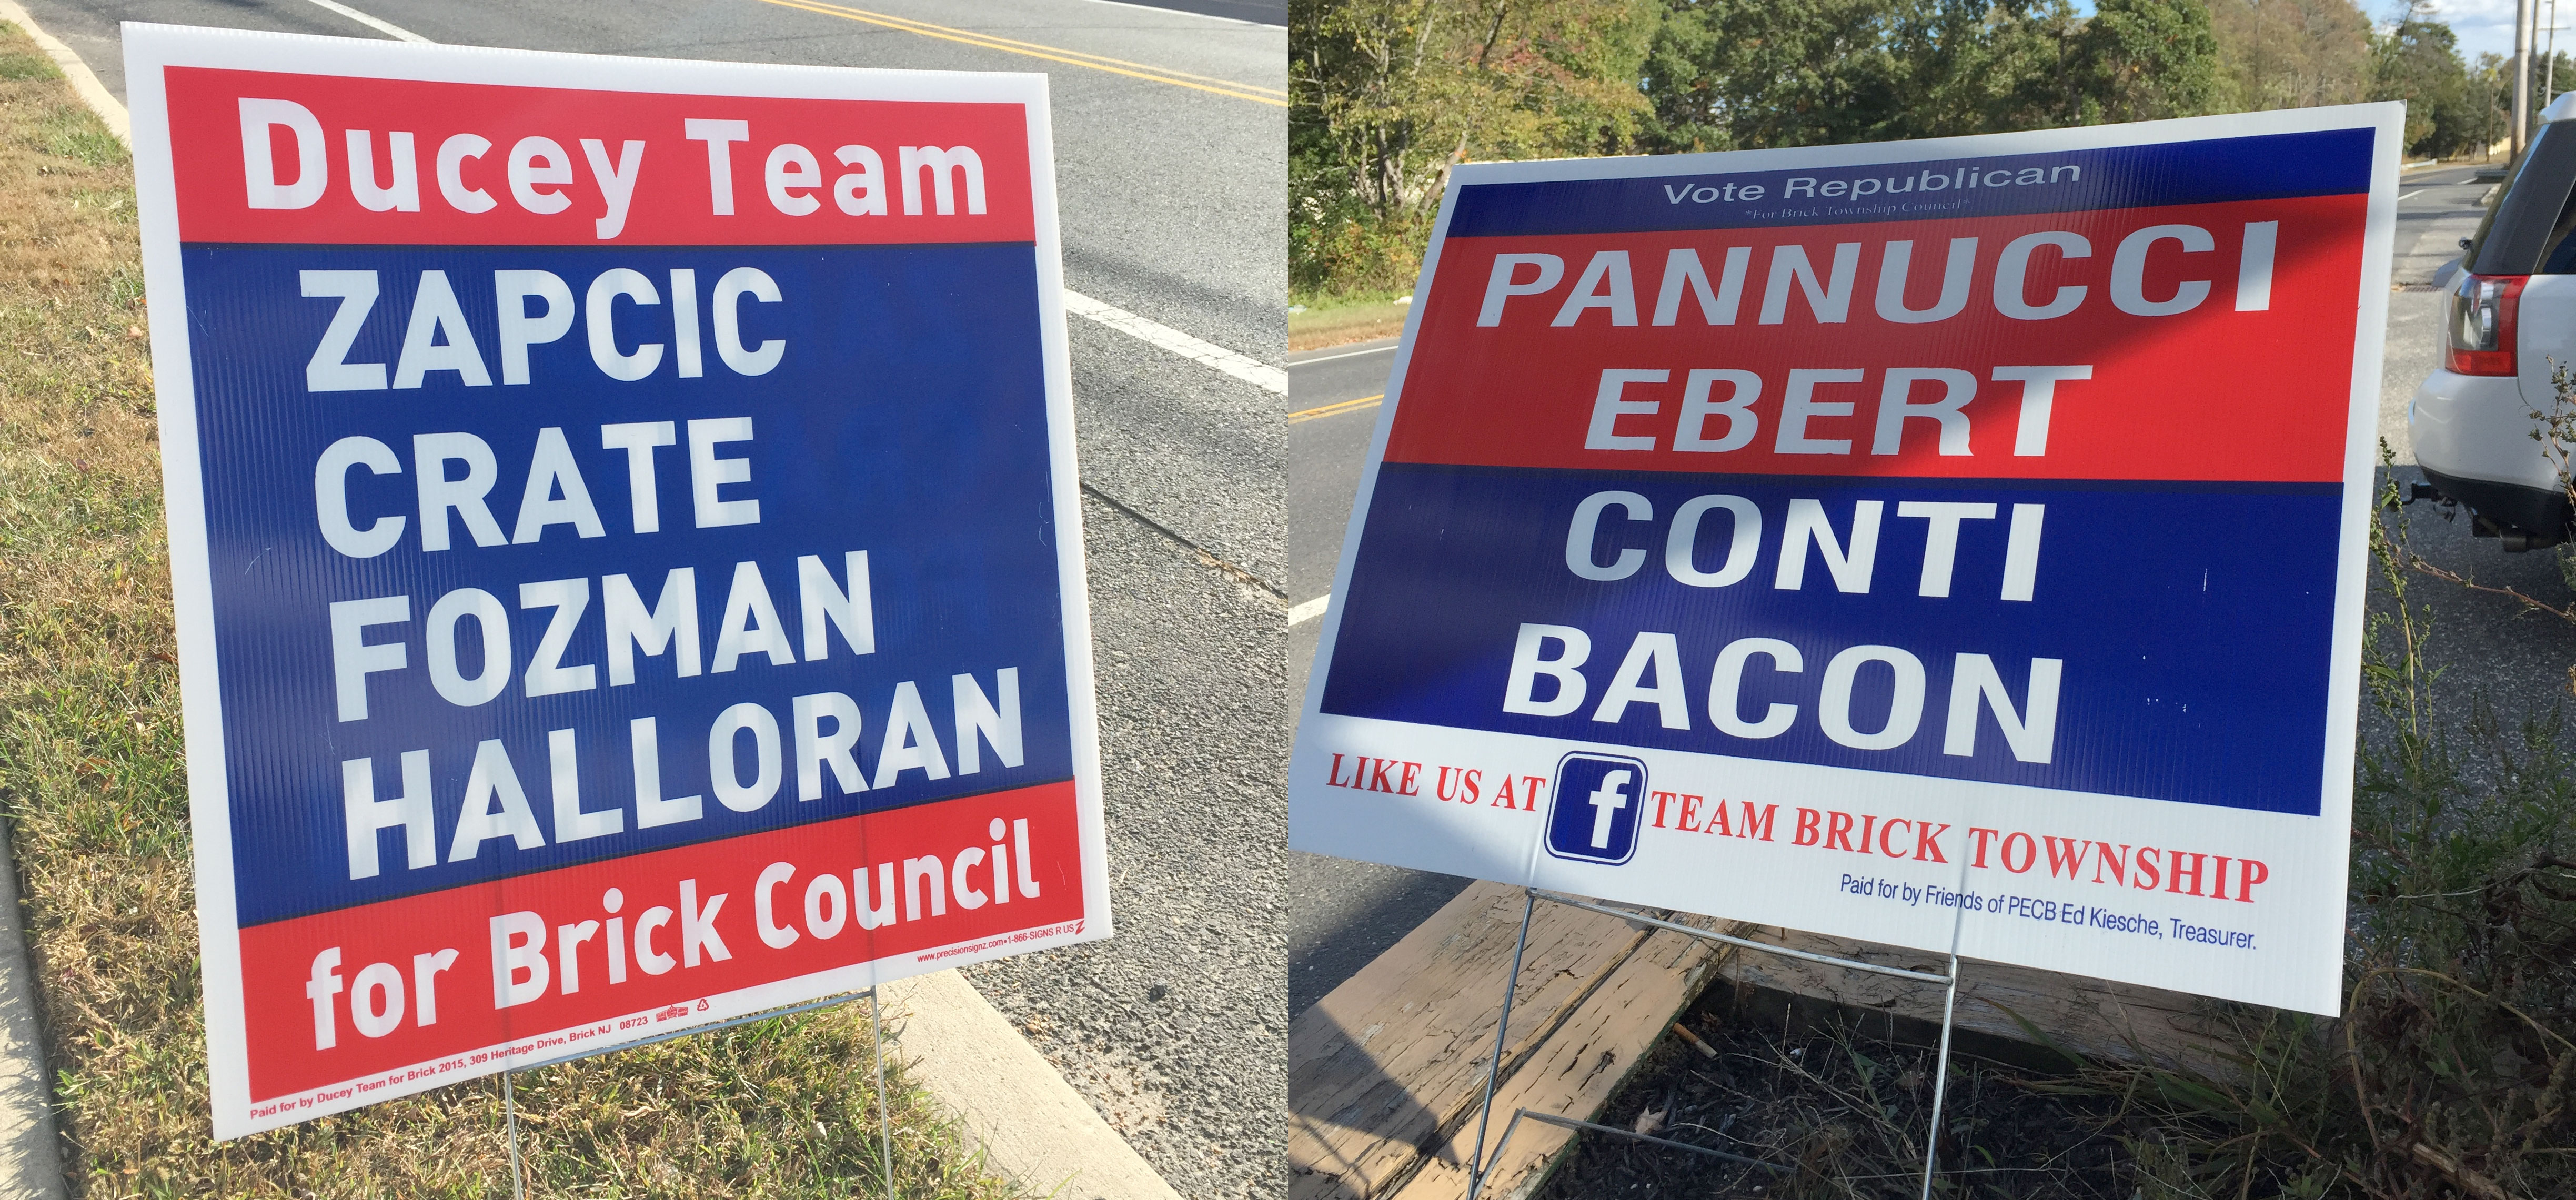 Campaign signs for the Democratic (left) and Republican candidates in Brick, 2015. (Photo: Daniel Nee)